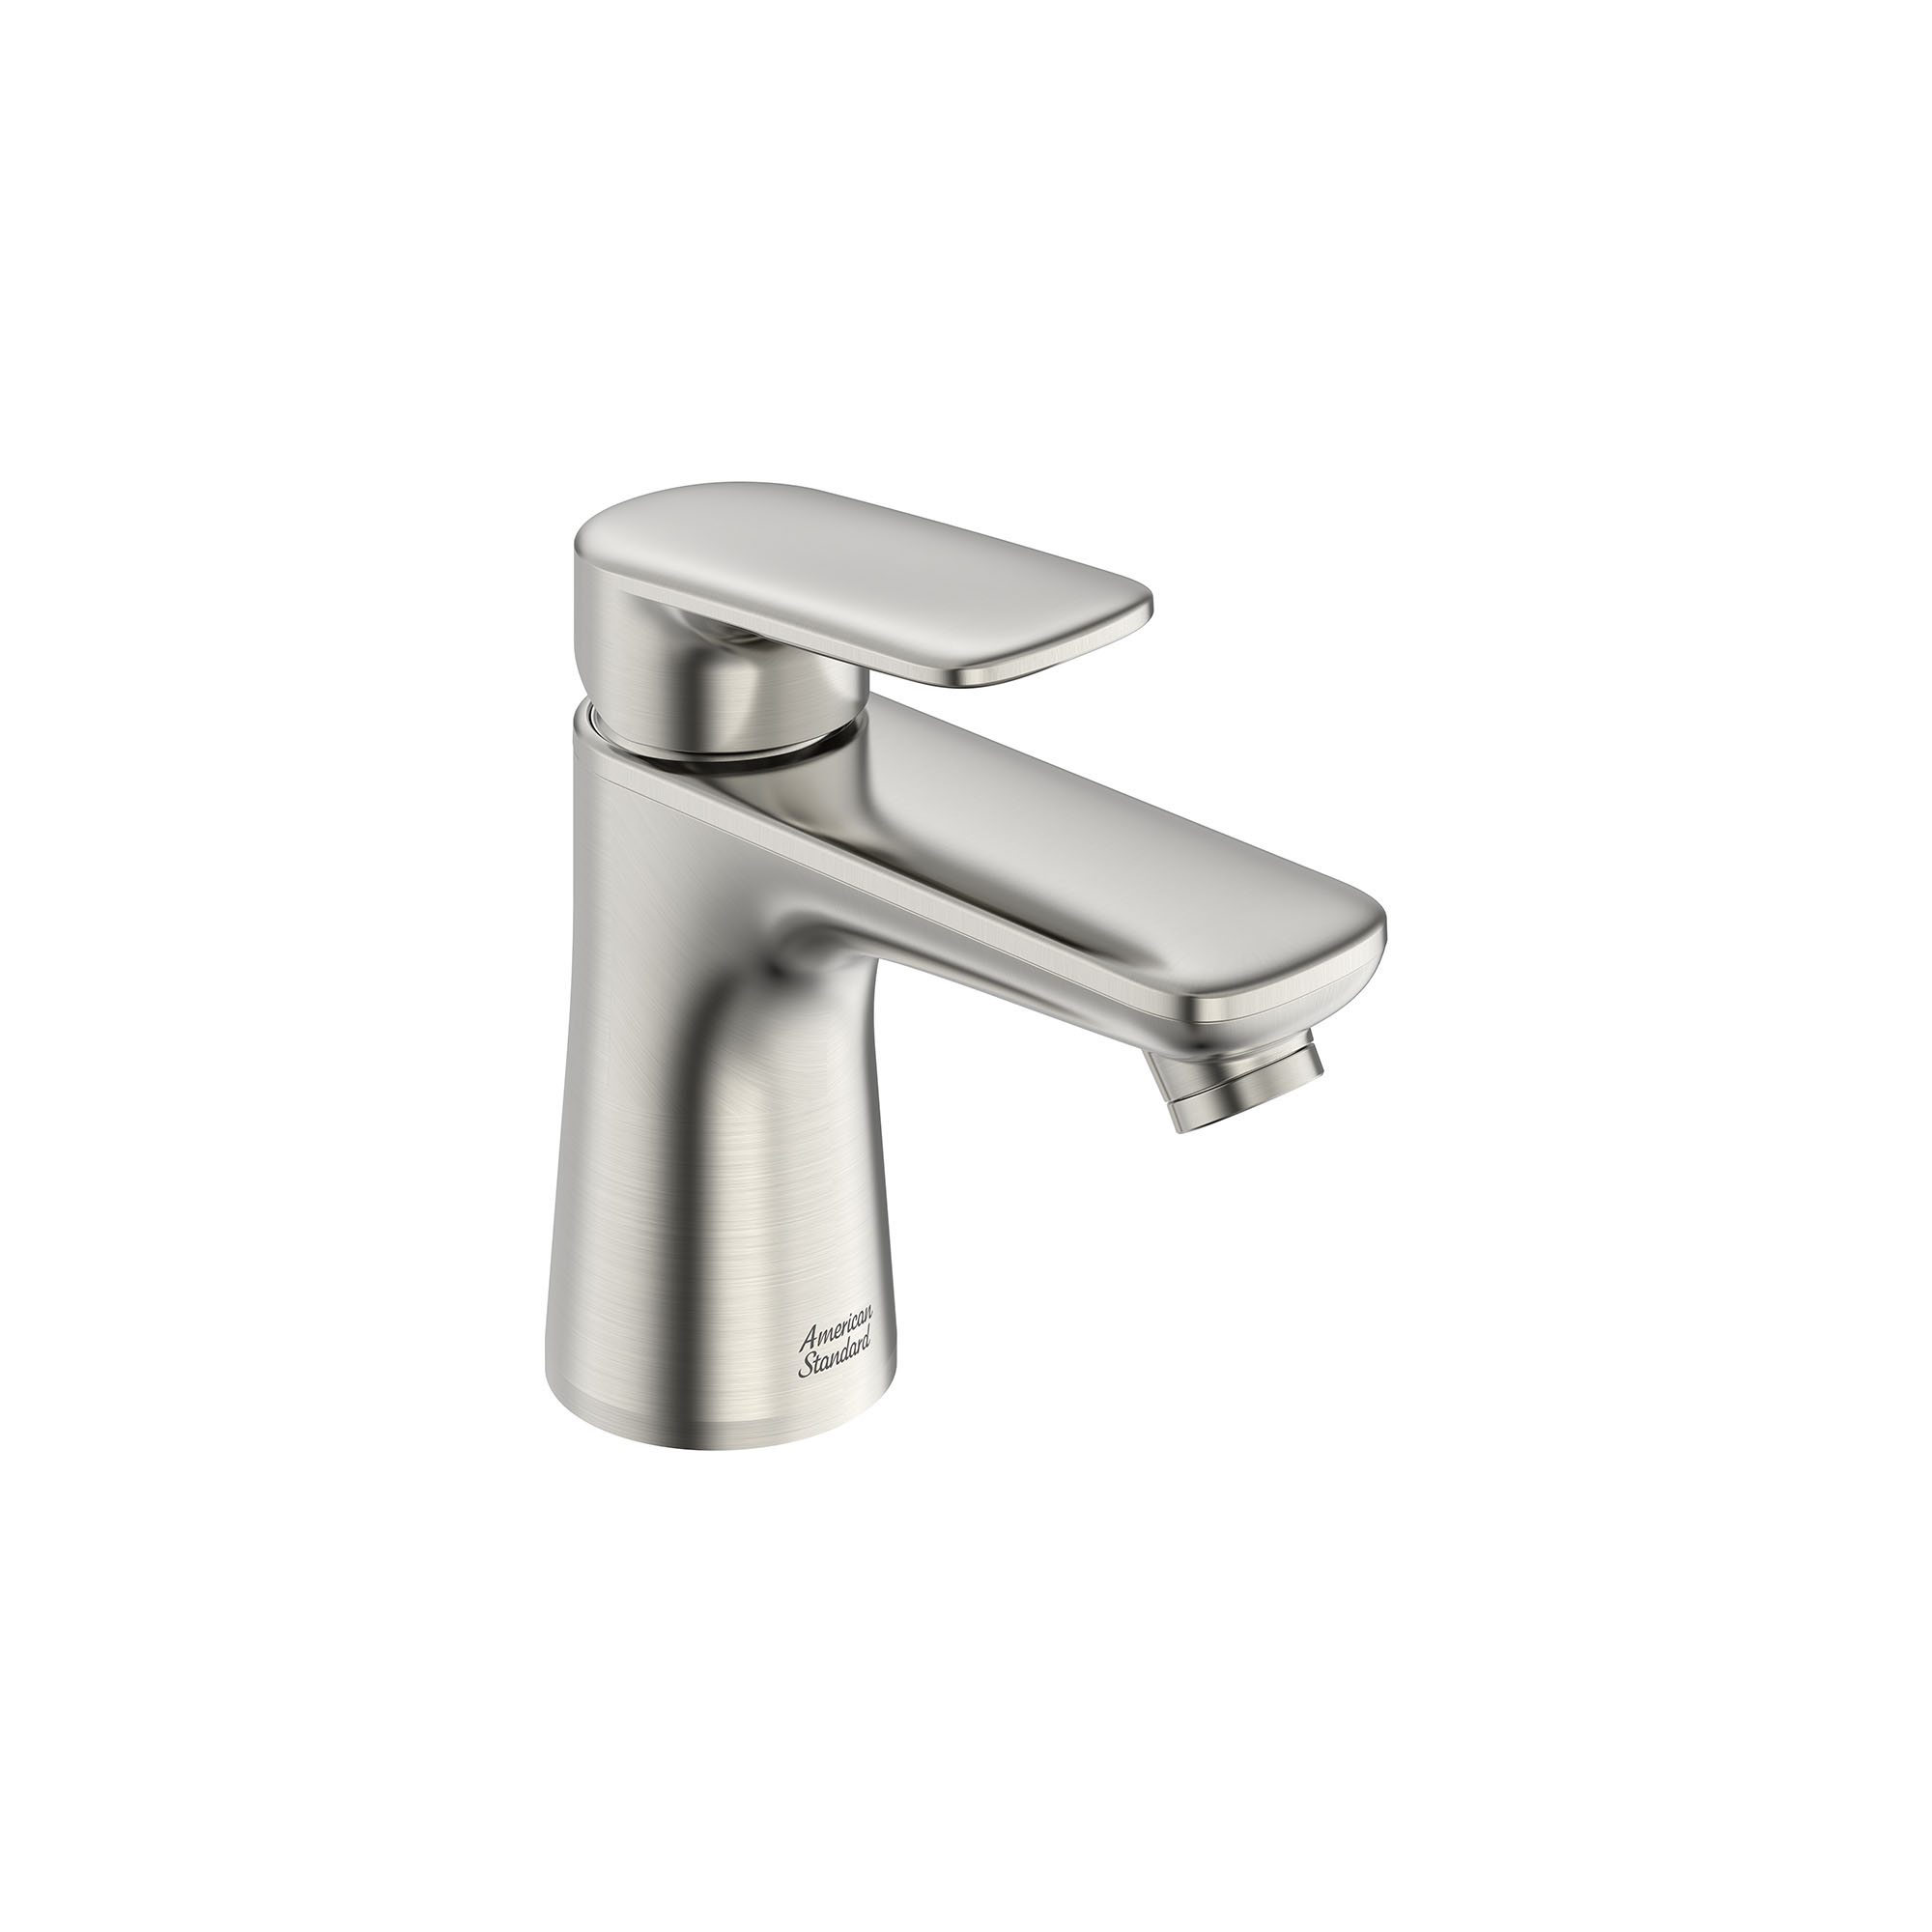 Aspirations™ Single-Handle Petite Bathroom Faucet 1.2 gpm/4.5 L/min With Lever Handle